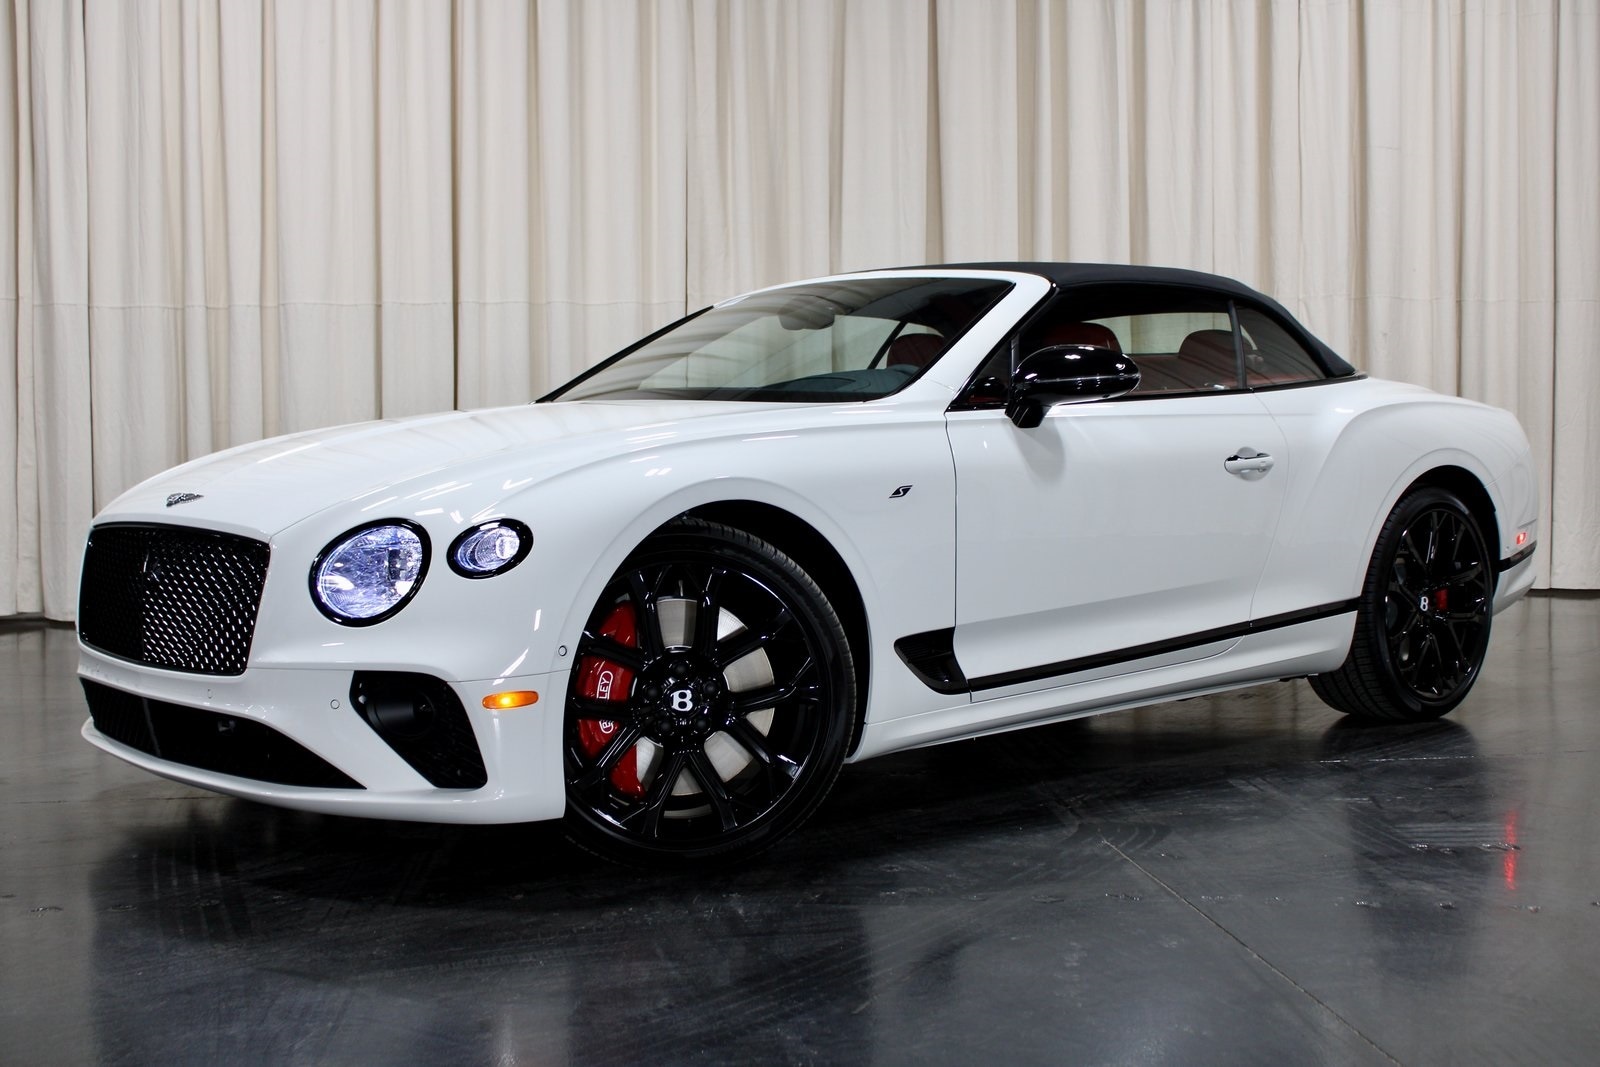 New 2023 Bentley Continental GTC S V8 For Sale at The Troy Motor Mall |  VIN: SCBDG4ZG1PC004705